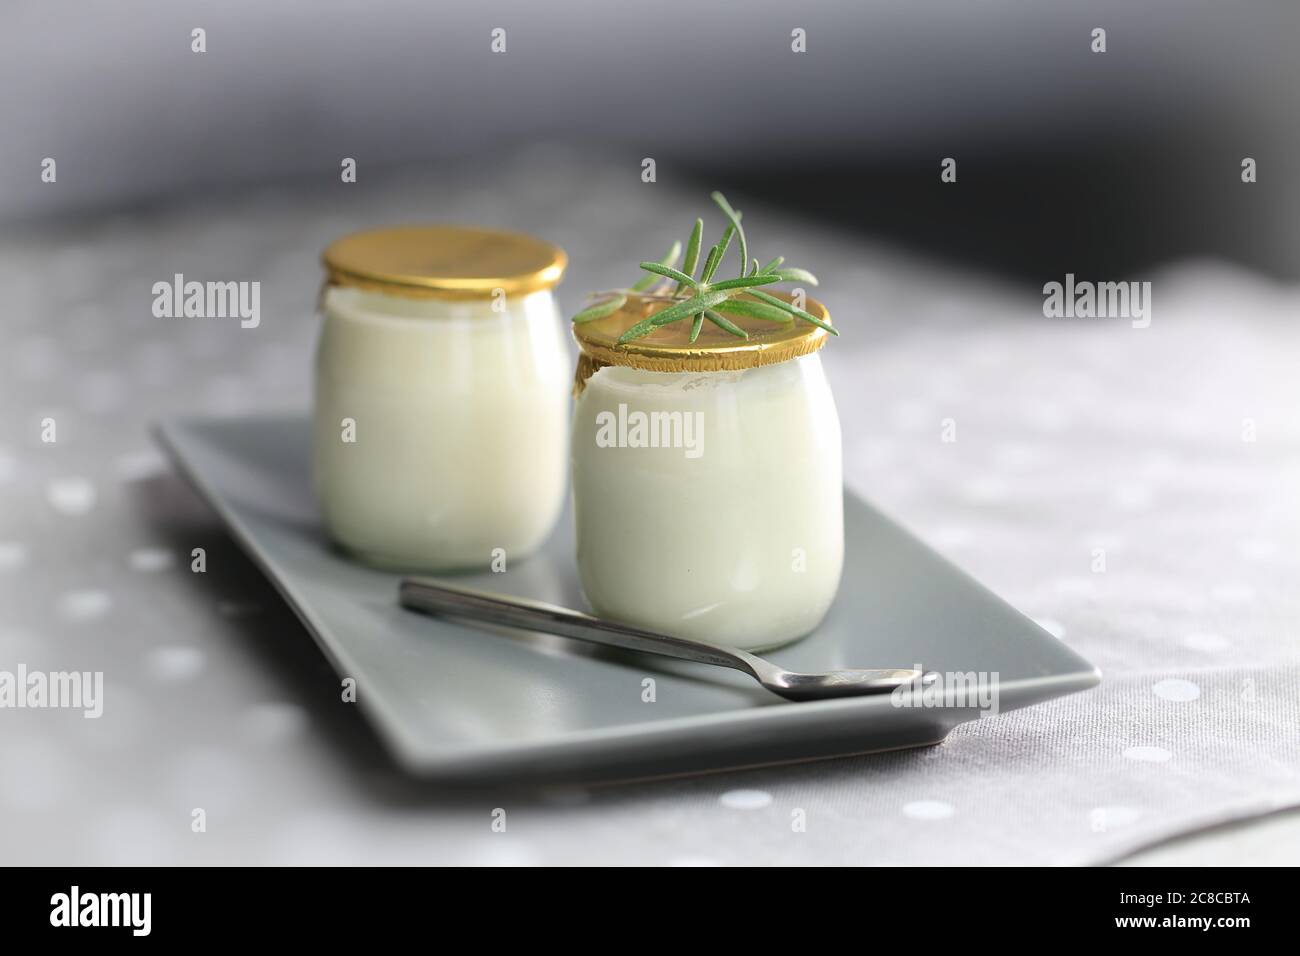 Yogurt in a glass jar with a spoon. Healthy food for breakfast, dairy product Stock Photo